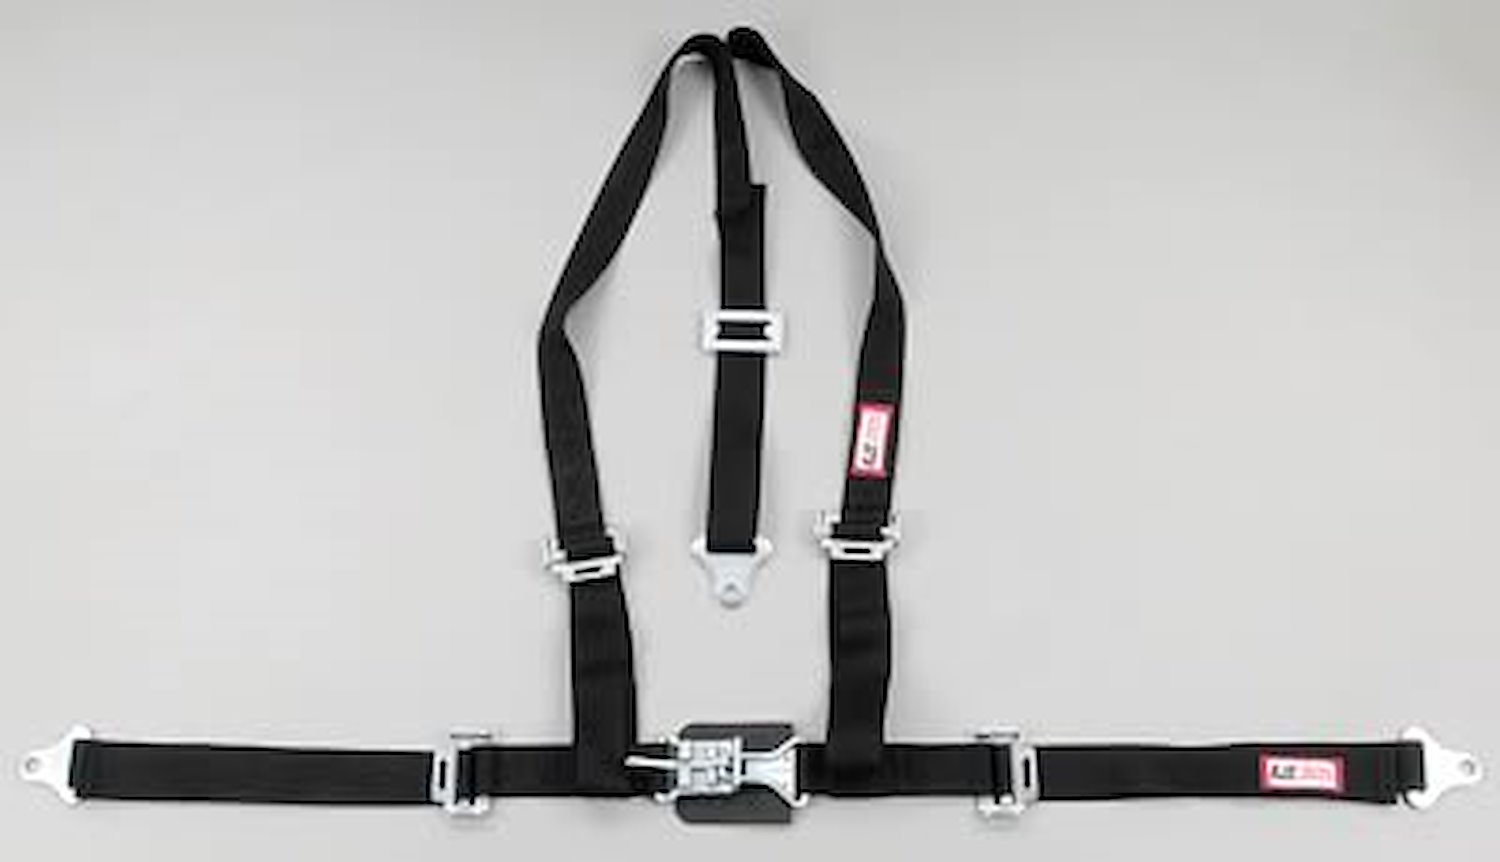 NON-SFI L&L HARNESS 2 PULL UP Lap Belt SNAP SEWN IN 2 S.H. V ROLL BAR Mount BOLT GRAY